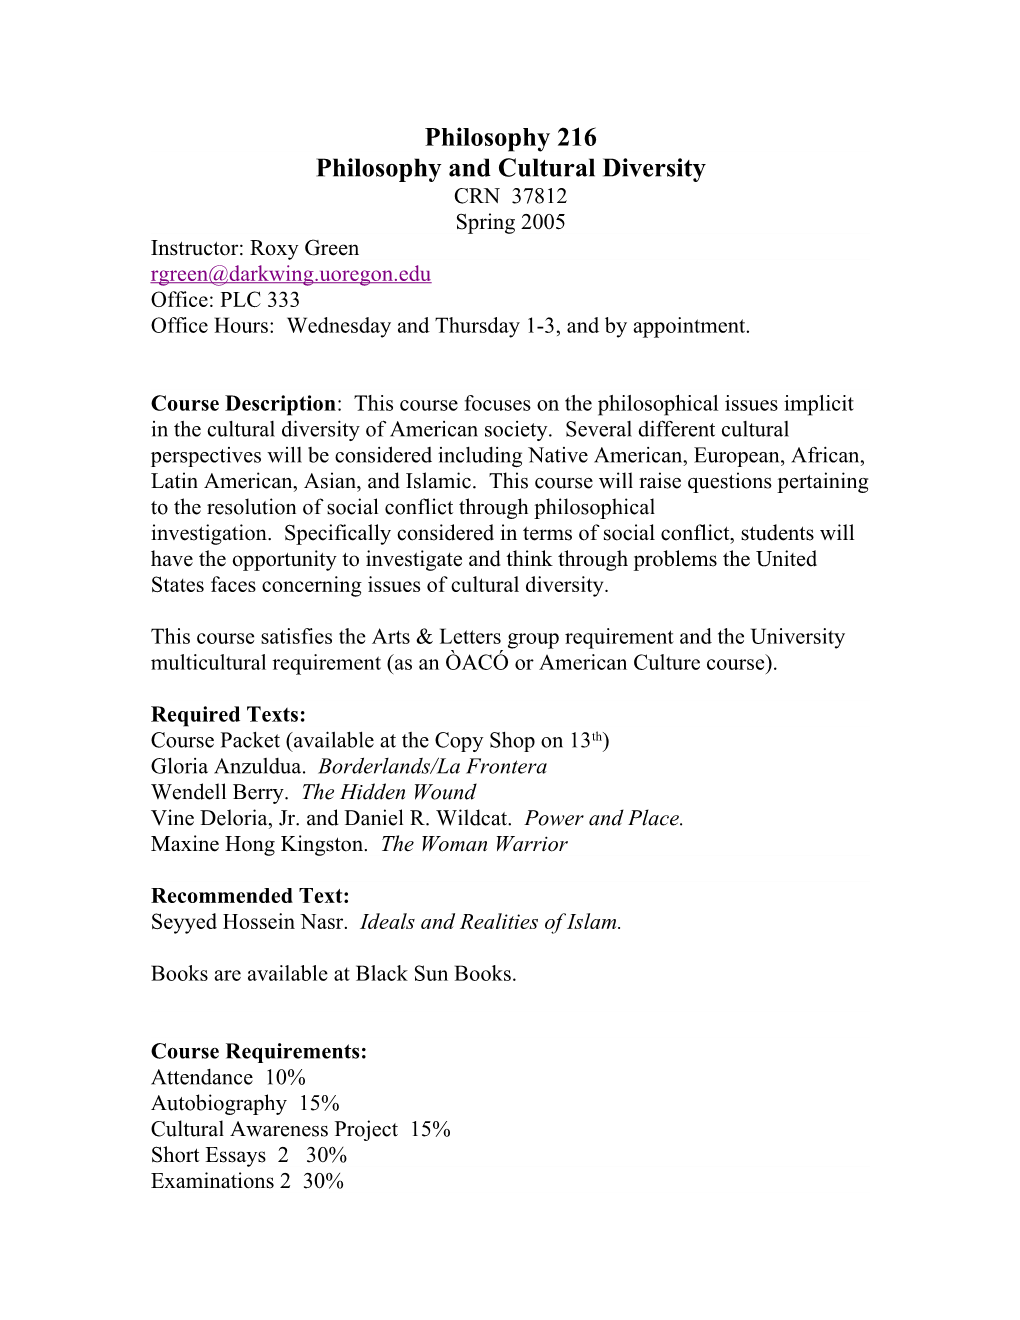 Philosophy and Cultural Diversity